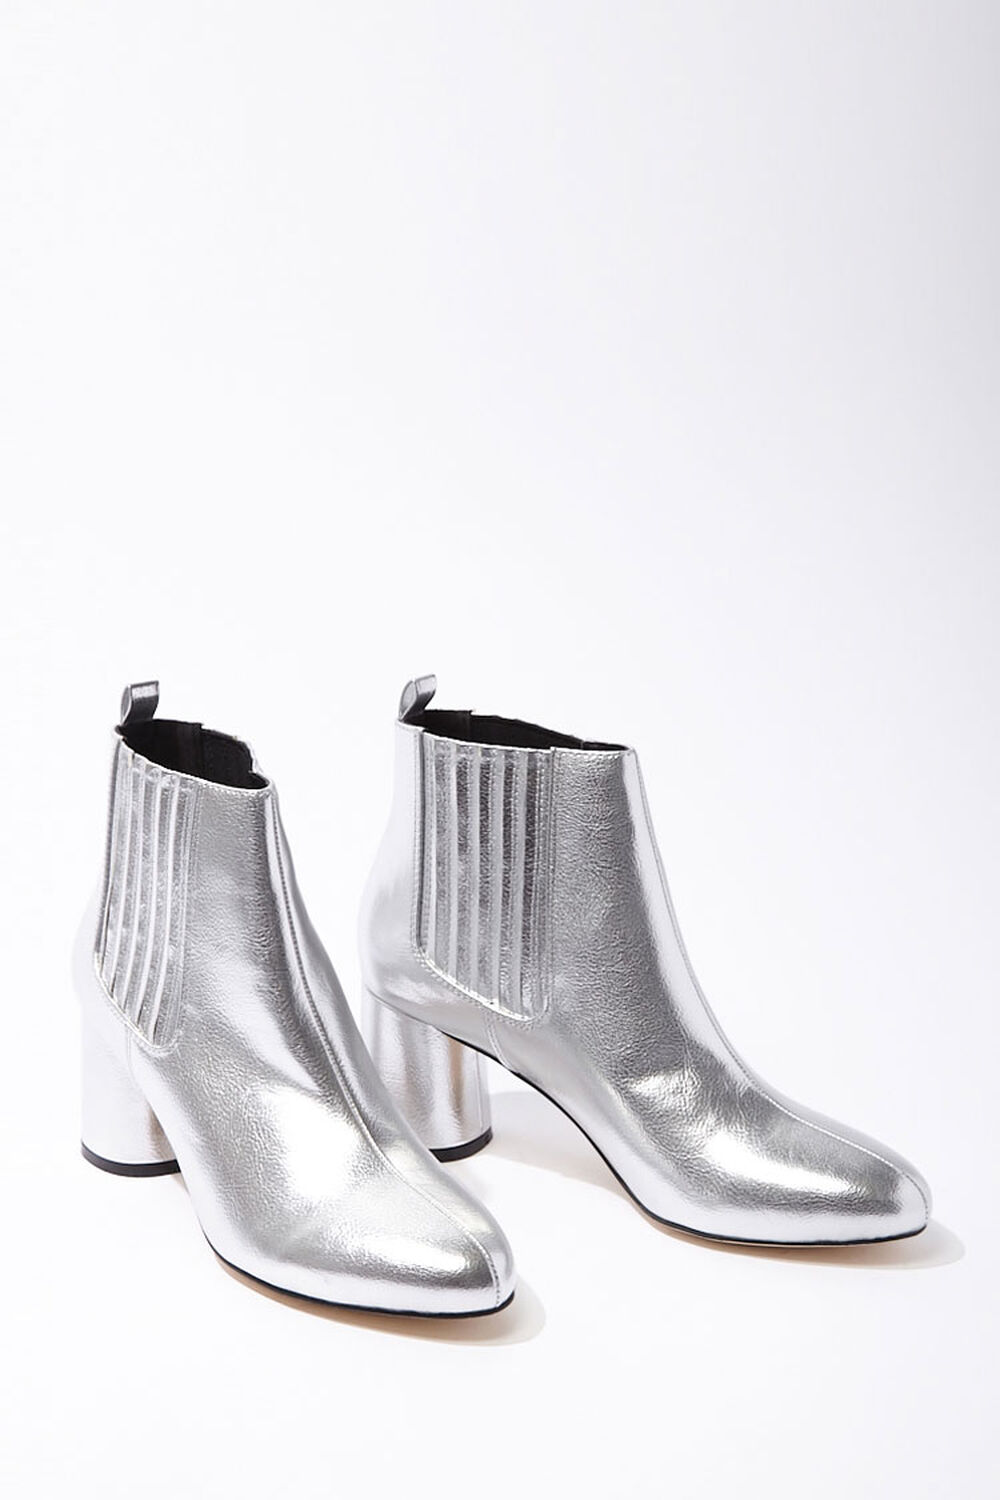 SILVER Metallic Faux Leather Booties, image 3